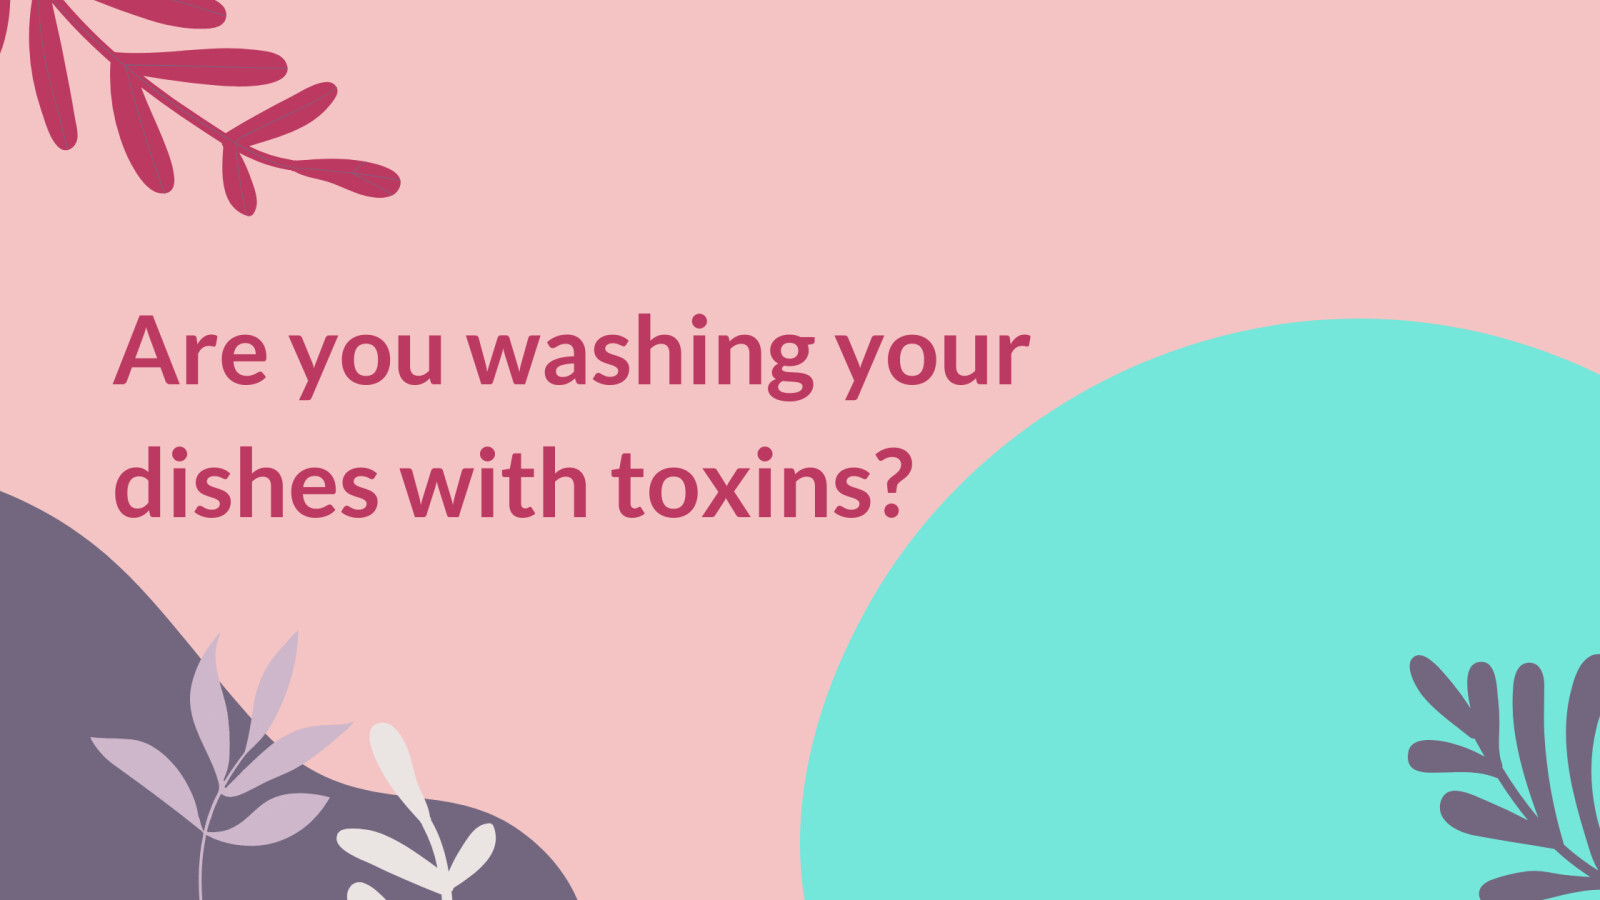 Toxic Free Tuesday: Dishwashing Detergents and Powders